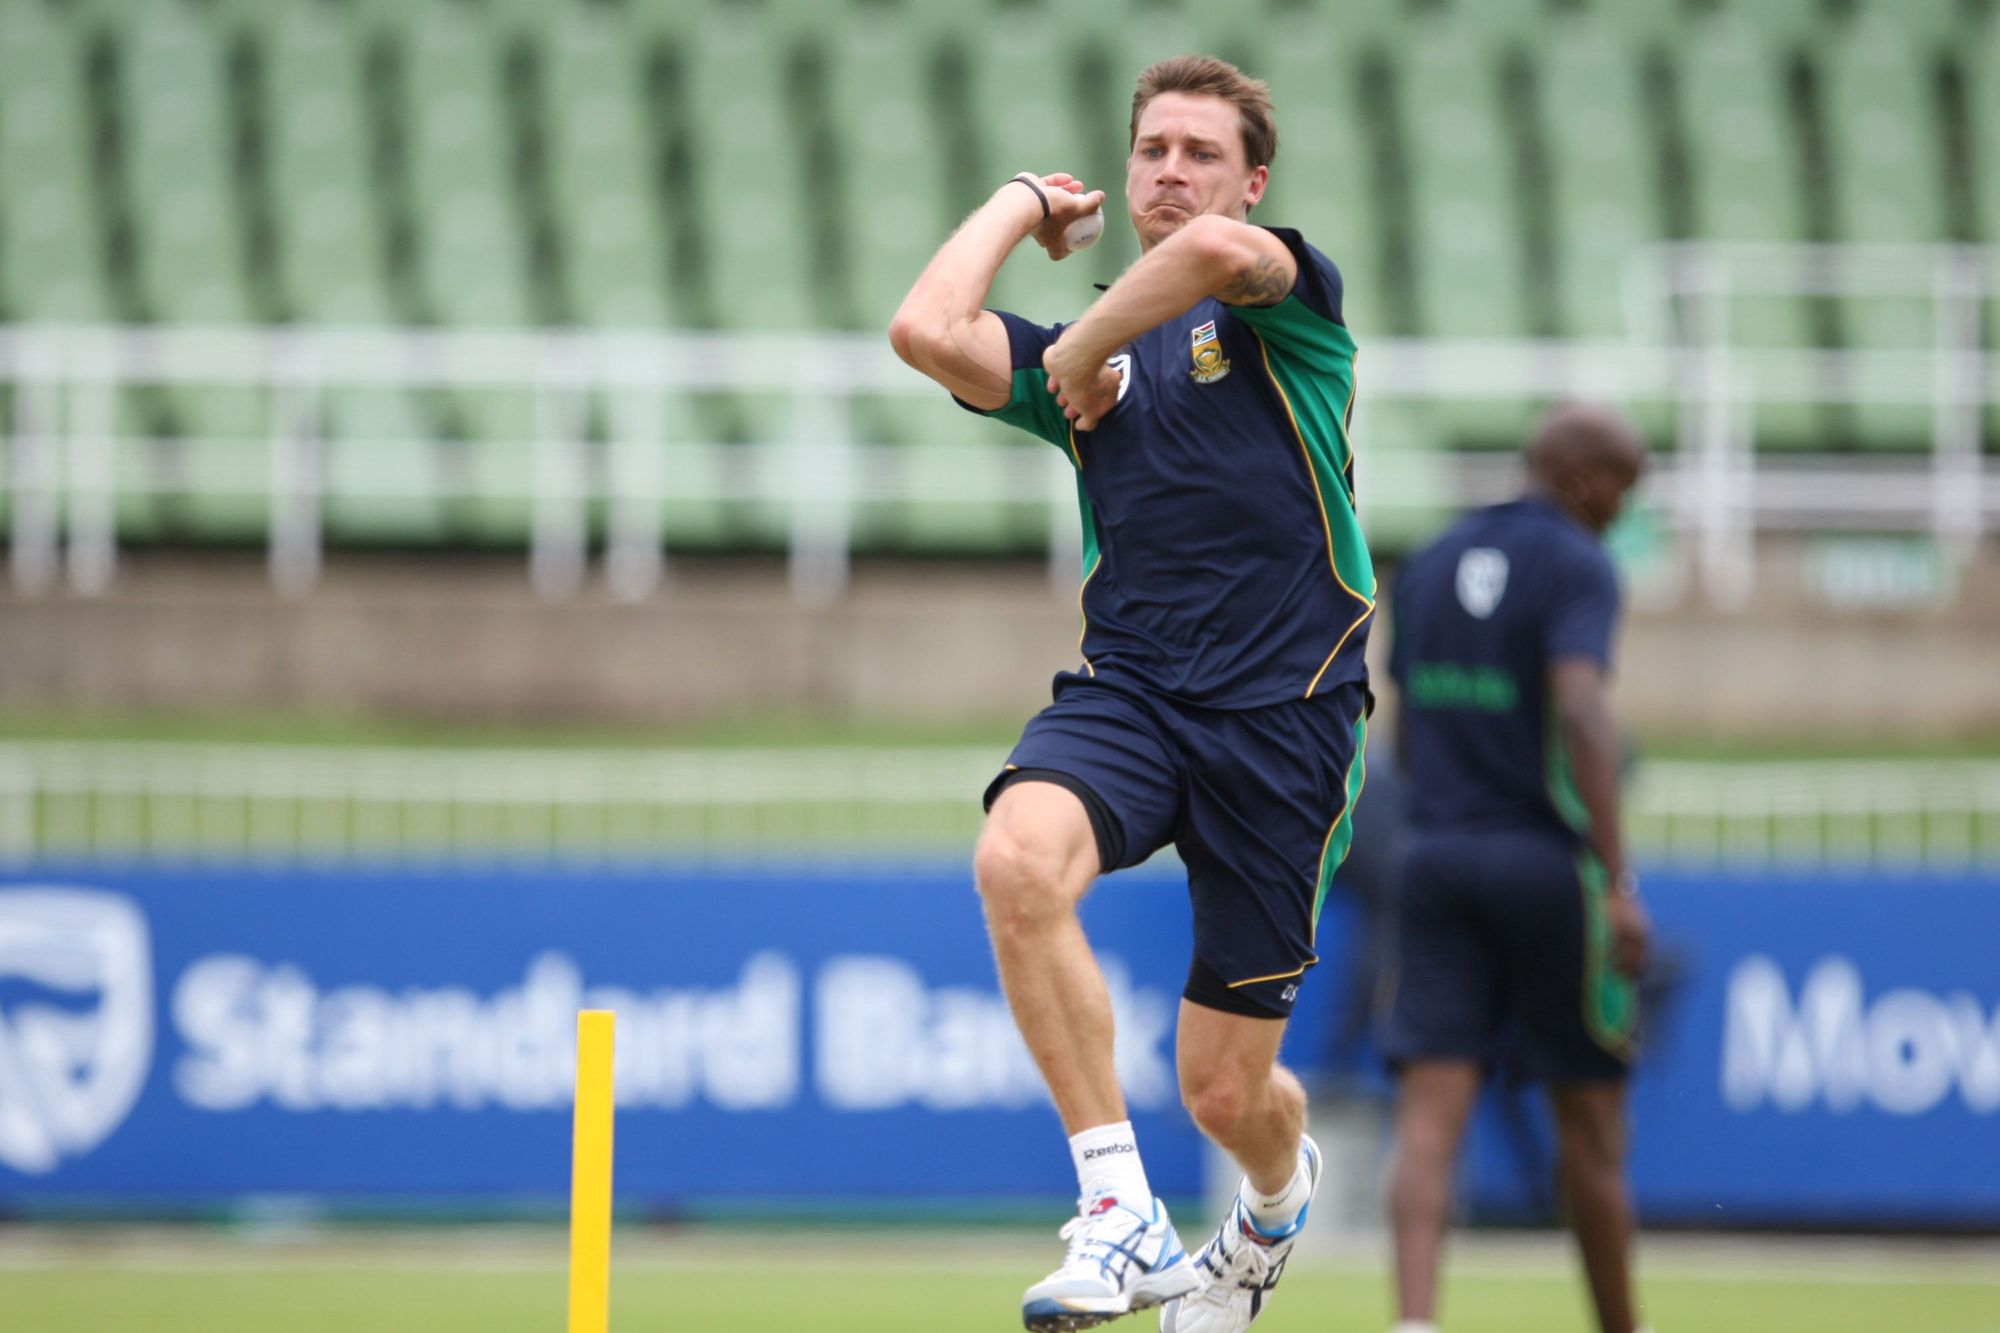 Dale Steyn, Nathan Coulter-Nile, World Cup, Royal Challengers Bangalore, Indian Premier League, South African fast bowler, Cricket news, Sports news